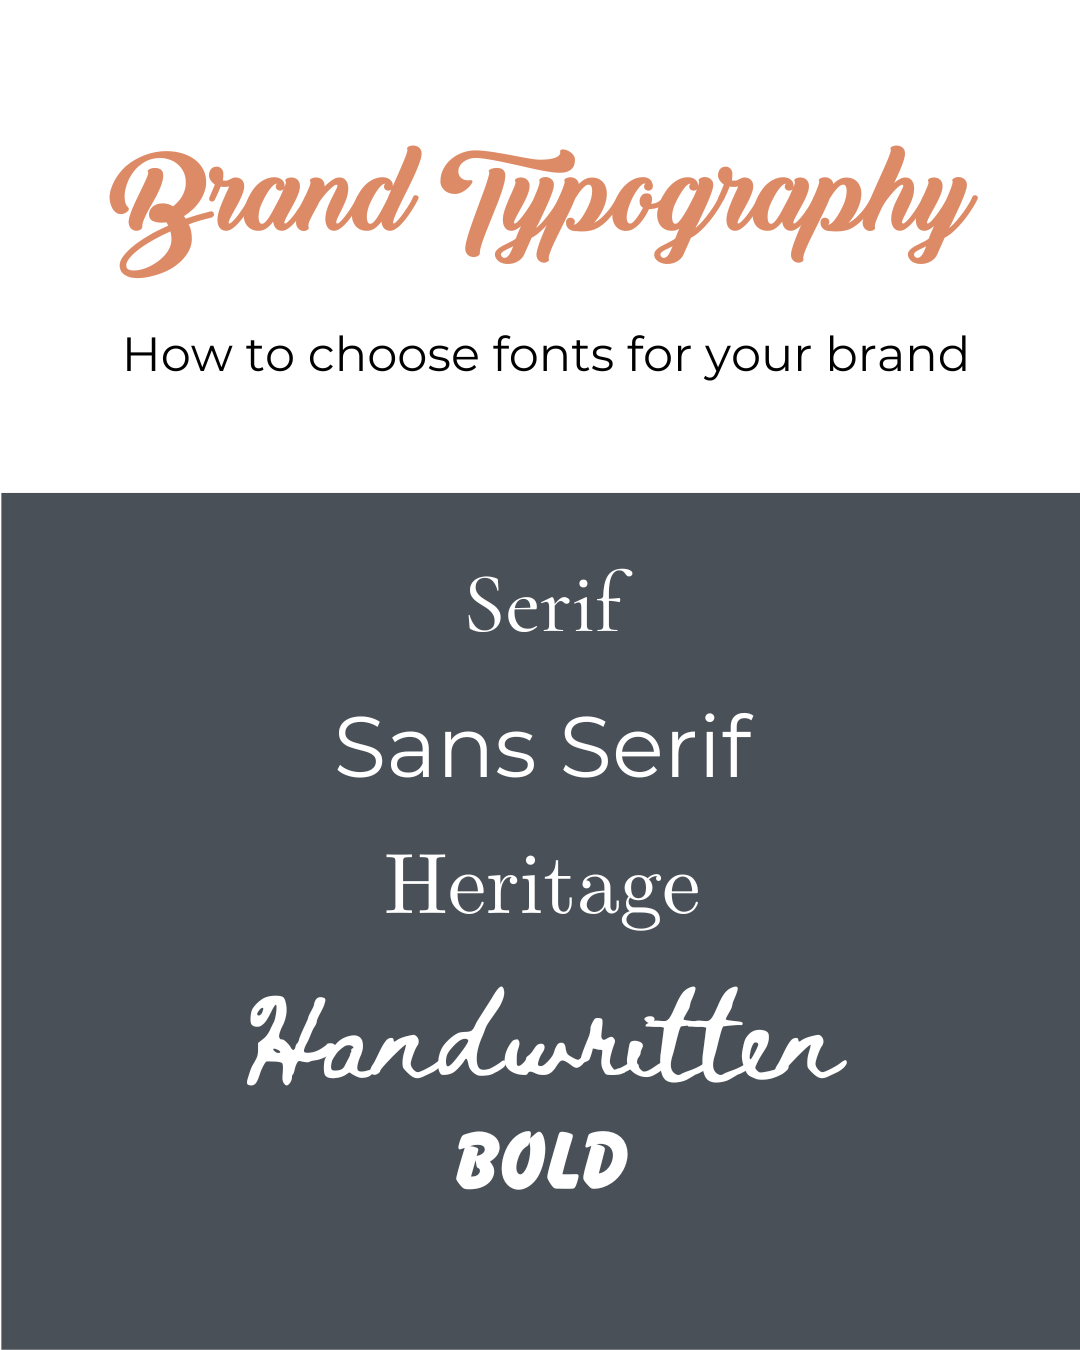 How to choose fonts for your brand.